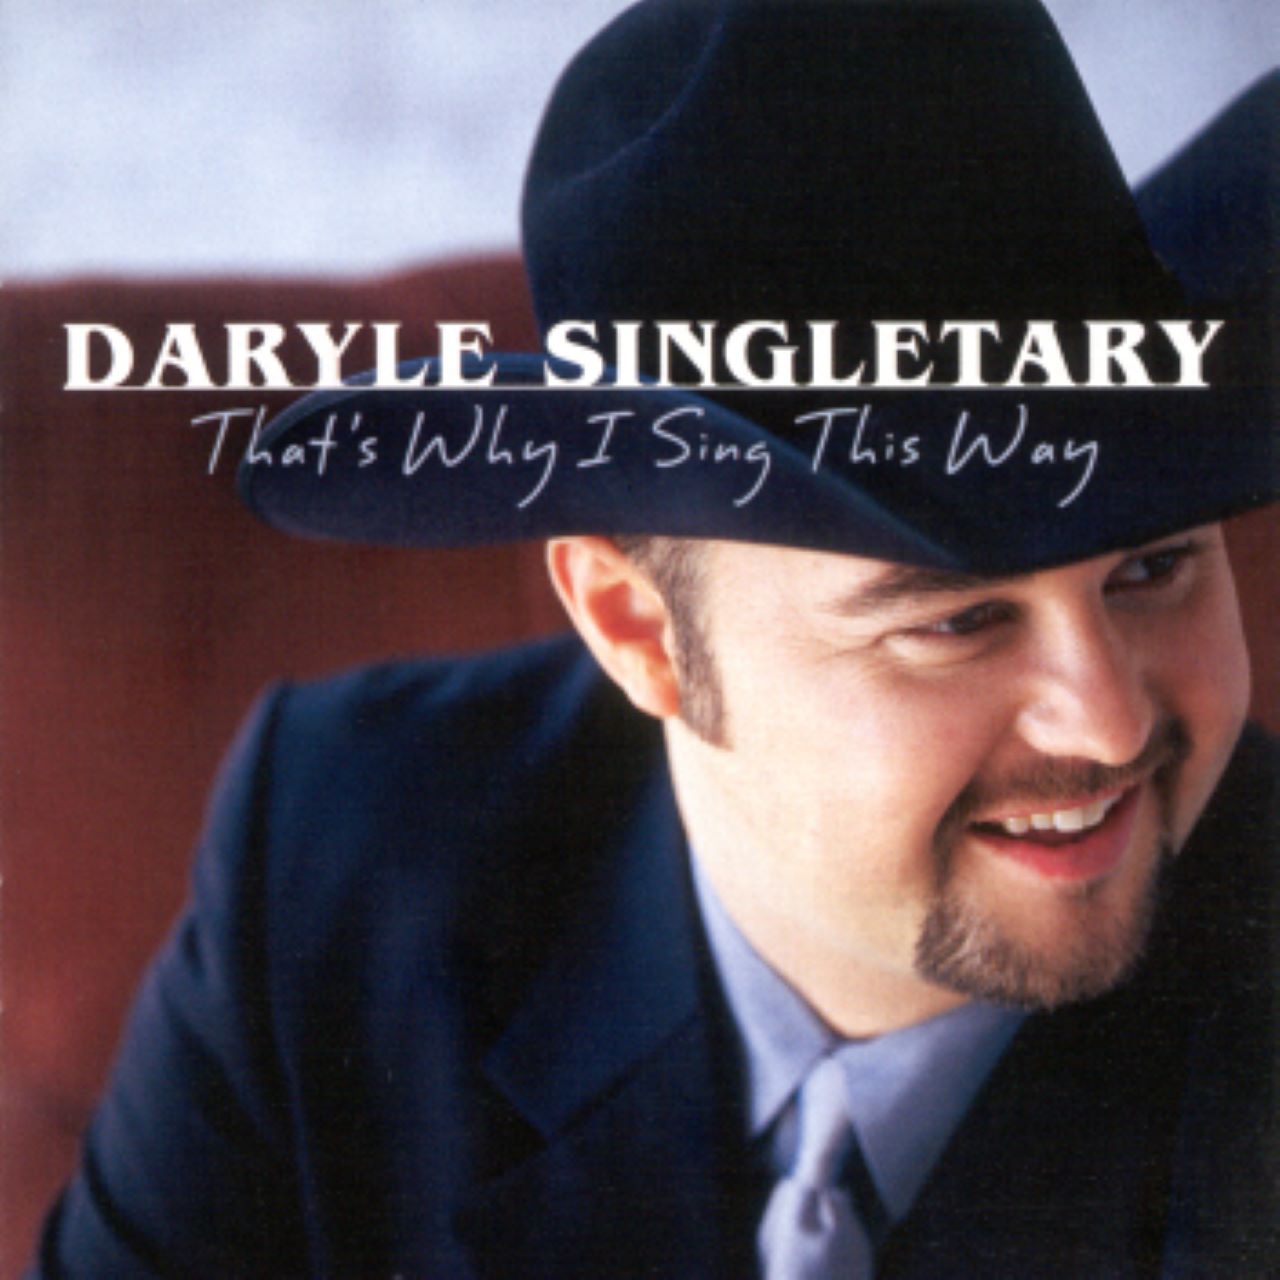 Daryle Singletary - That’s The Way I Sing This Way cover album